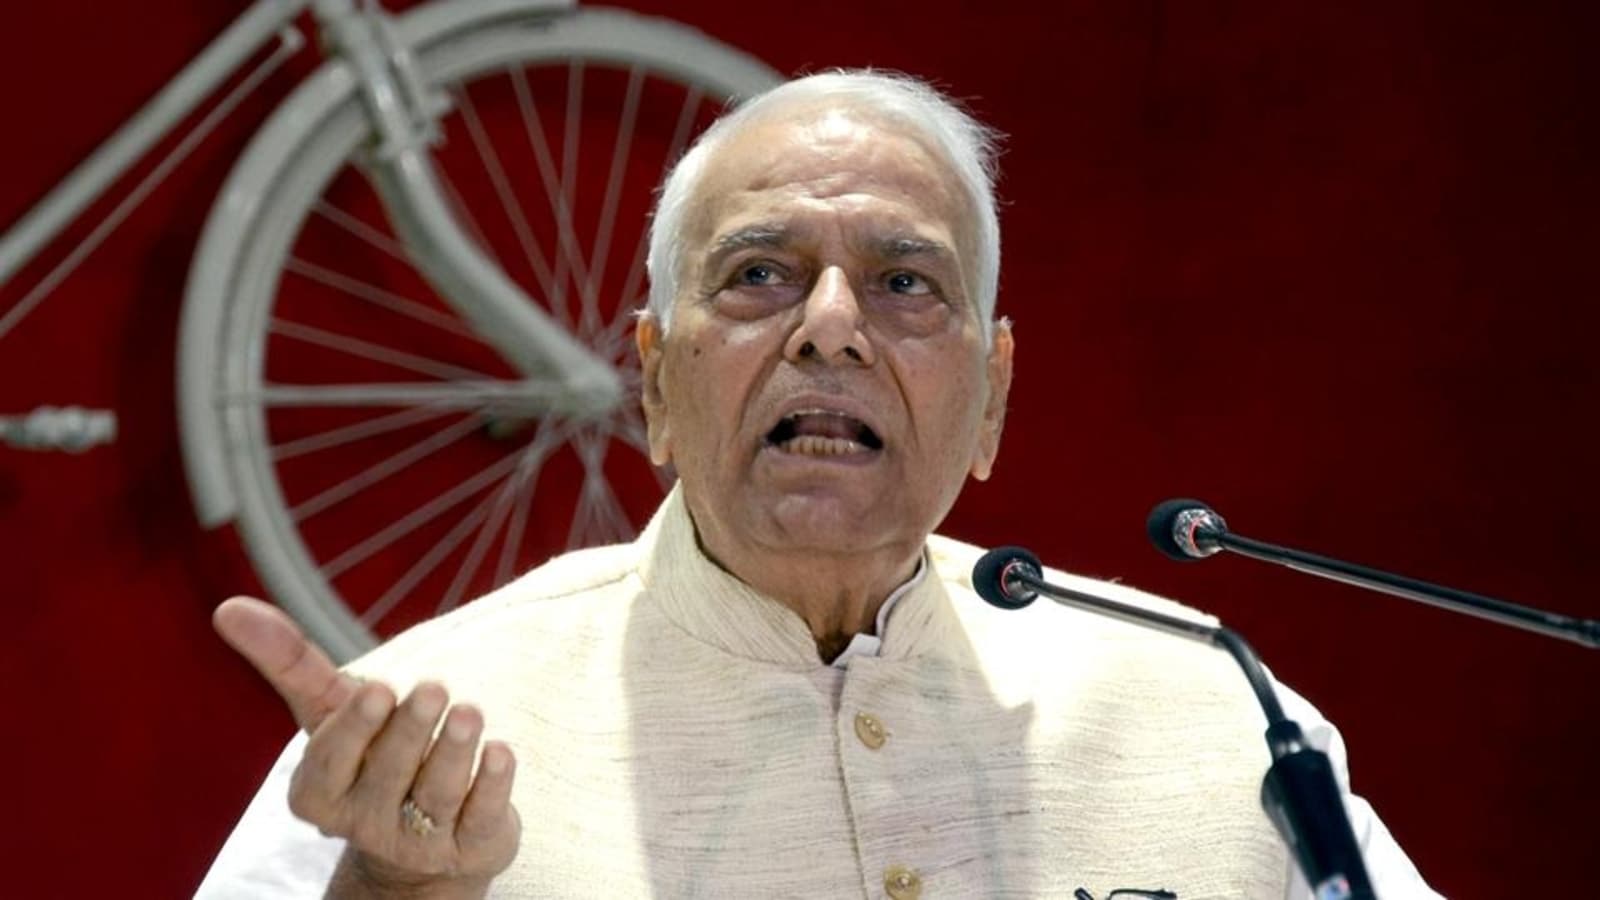 'Battle of two ideologies, not two people', says Presidential Candidate Yashwant Sinha, Appealing for Votes 